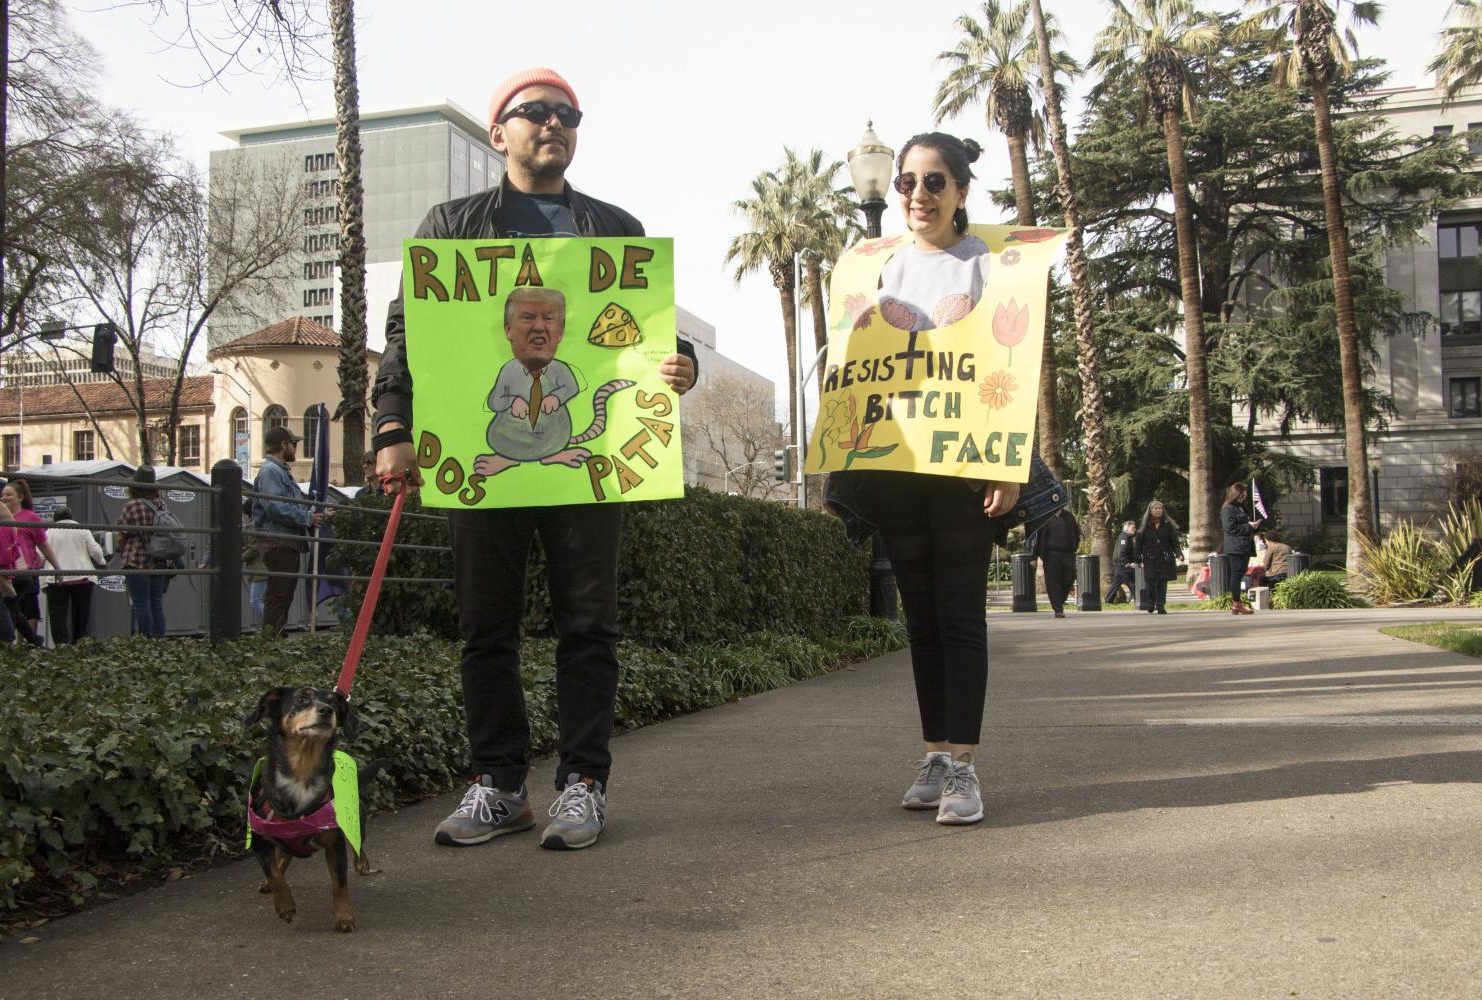 A demonstrator holds a sign that reads “Rata De Dos Patas” which translates to two legged rat as another participant wears her sign that reads “Resisting Bitch Face” at the California State Capitol during the third annual Women’s March.